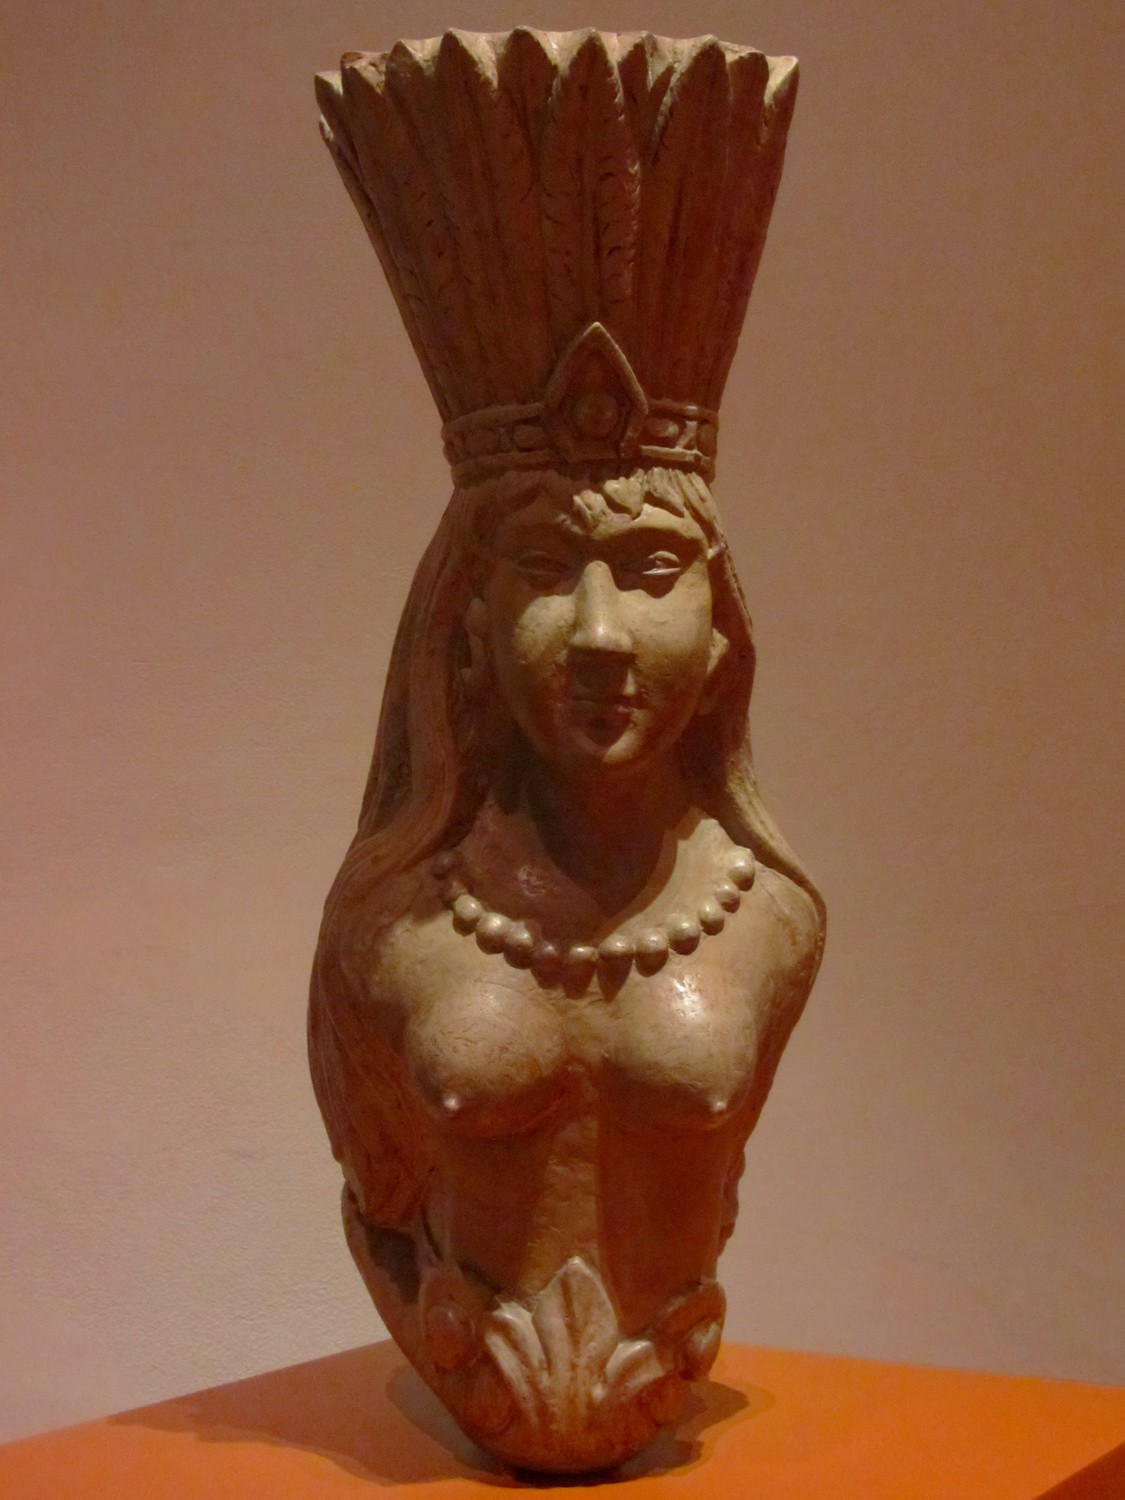 Ship's figurehead in the Museu Historico Nacional. It belonged to the Paraguayan ship Salto Oriental which was captured by the Brazilian Navy during the War of the Triple Alliance (Argentina, Brazil and Uruguay against Paraguay in 1865)